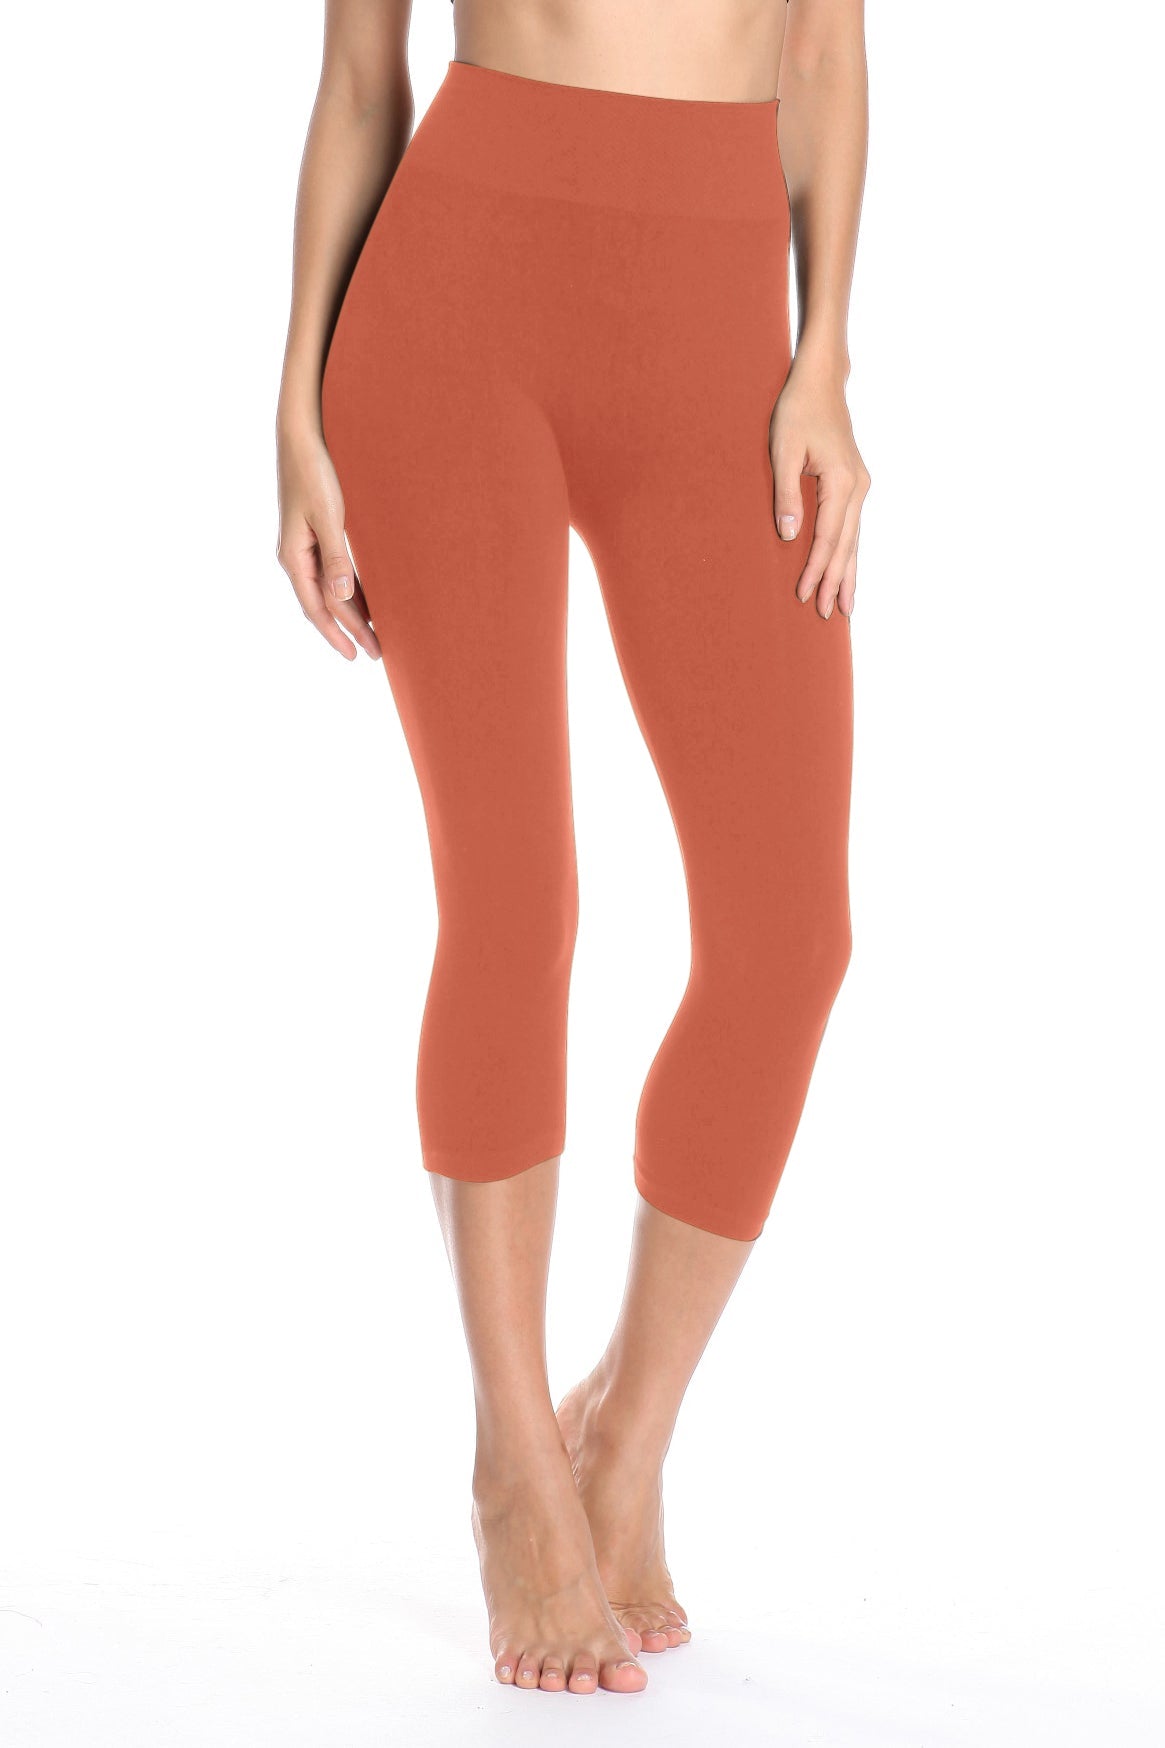 LMB Capri Leggings for Women with High Wast and Cameroon